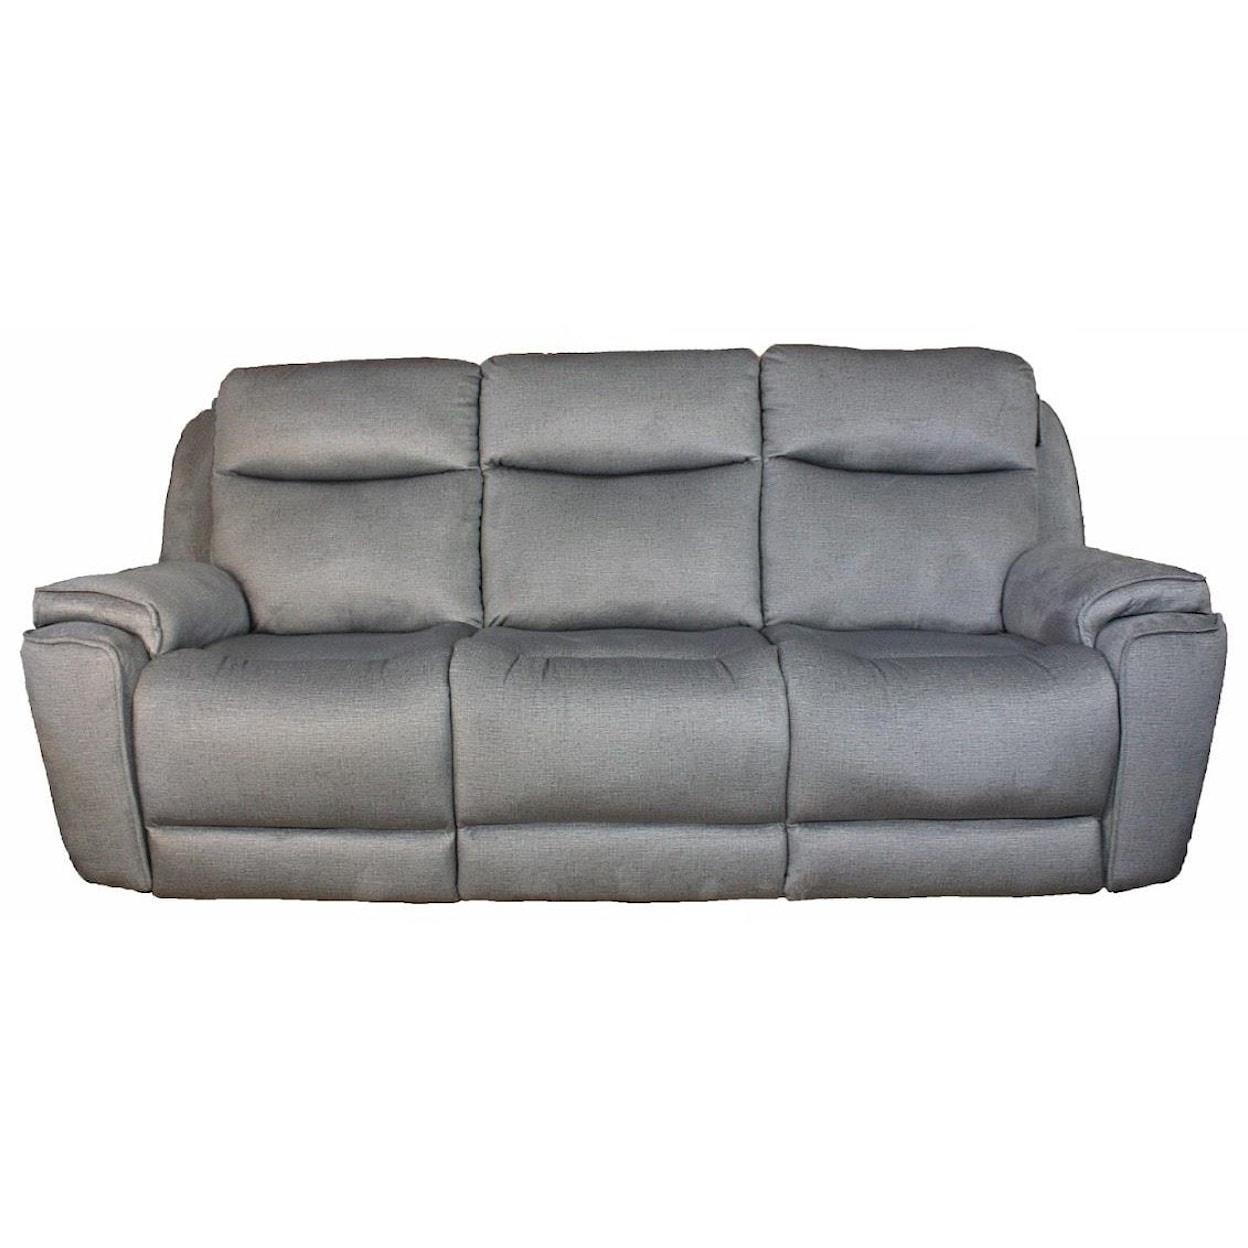 Southern Motion Show Stopper Power Headrest Reclining Sofa